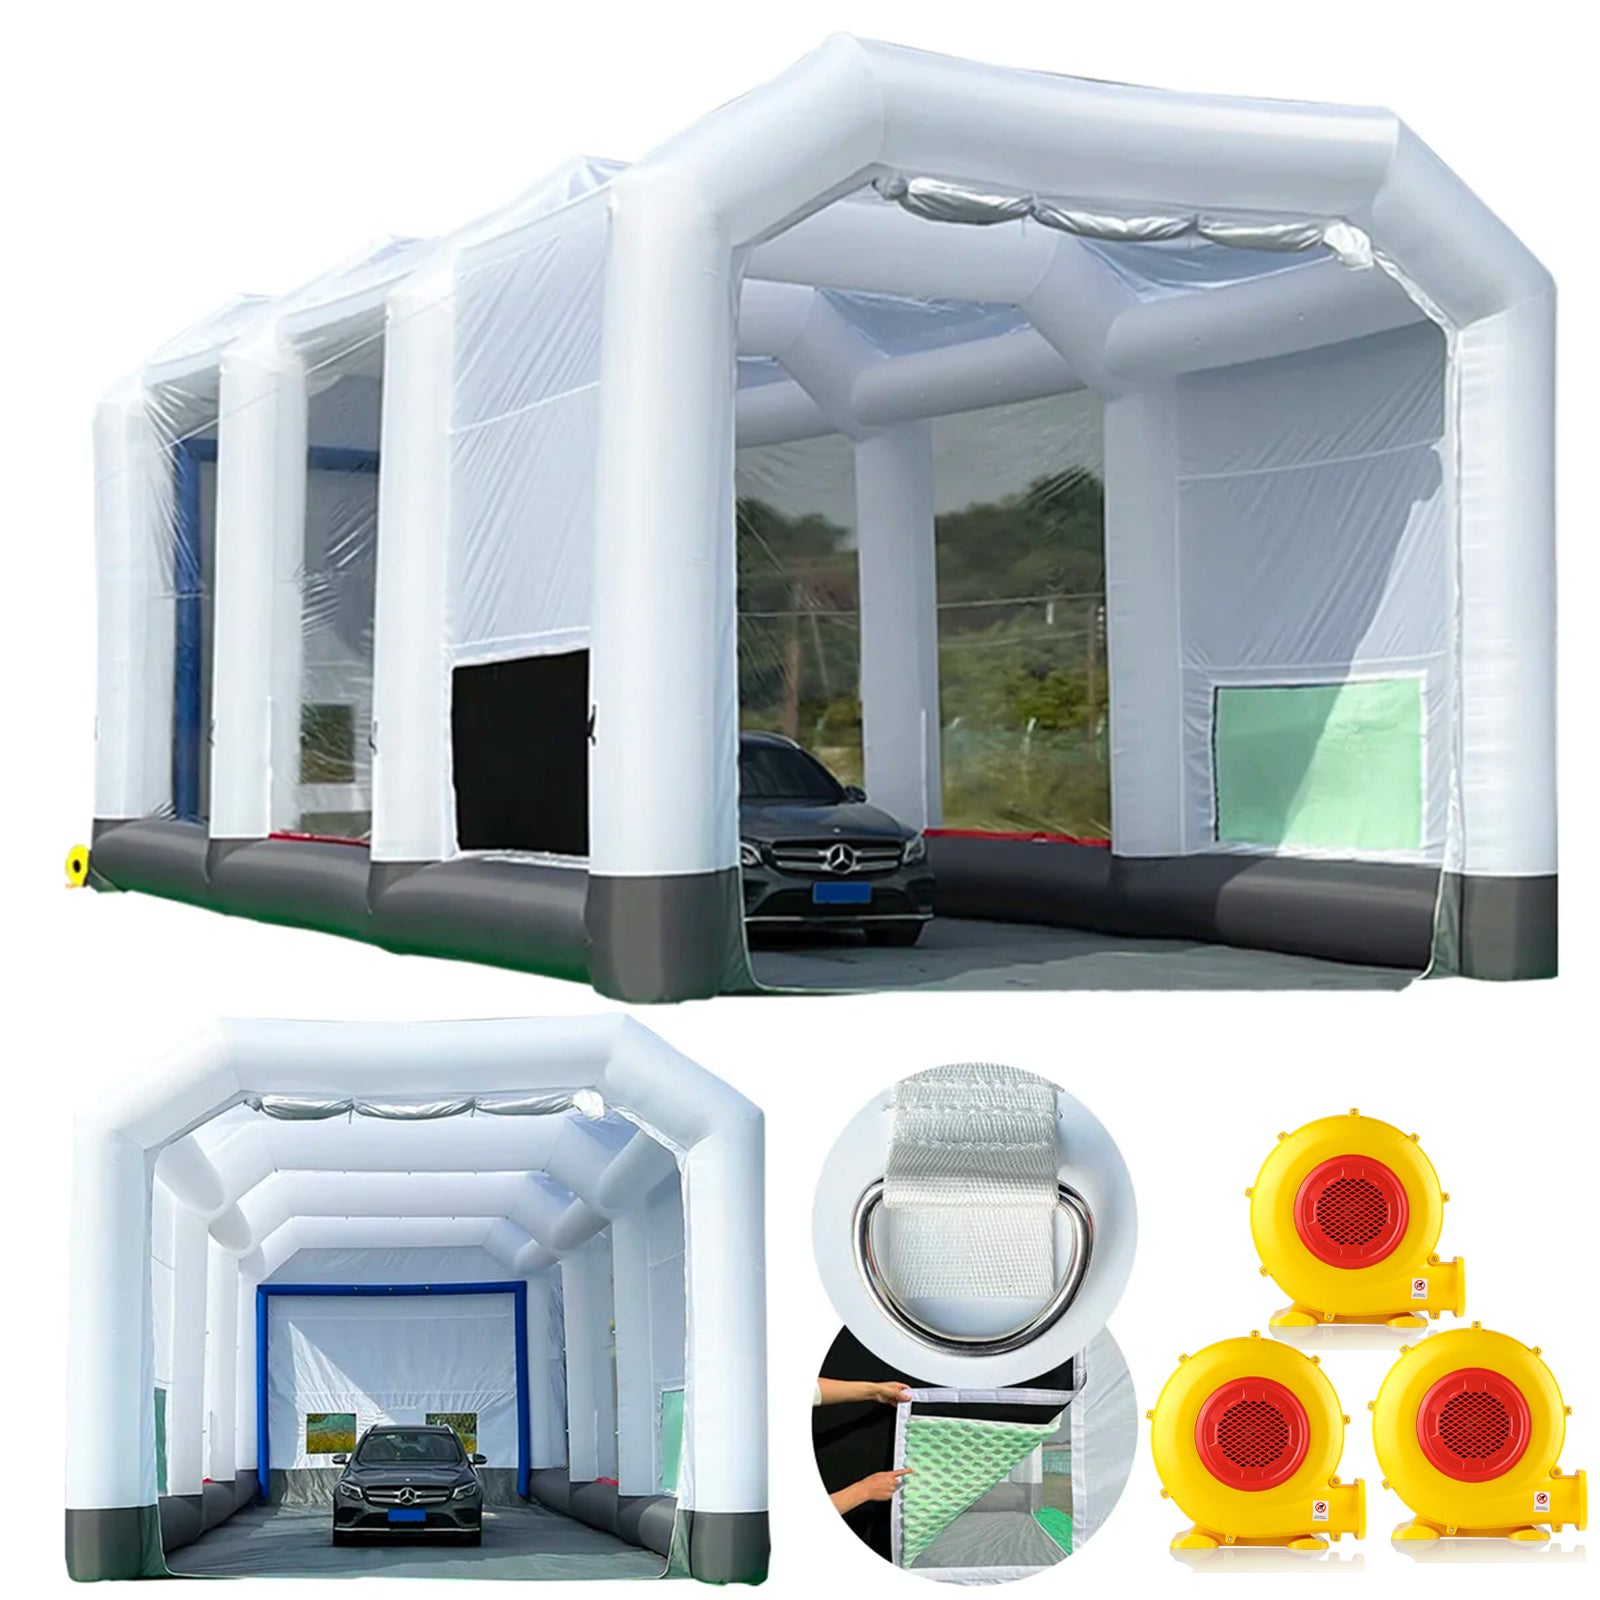 GORILLASPRO Inflatable Spray Paint Booth 40X20X13Ft with 3 Blowers (11